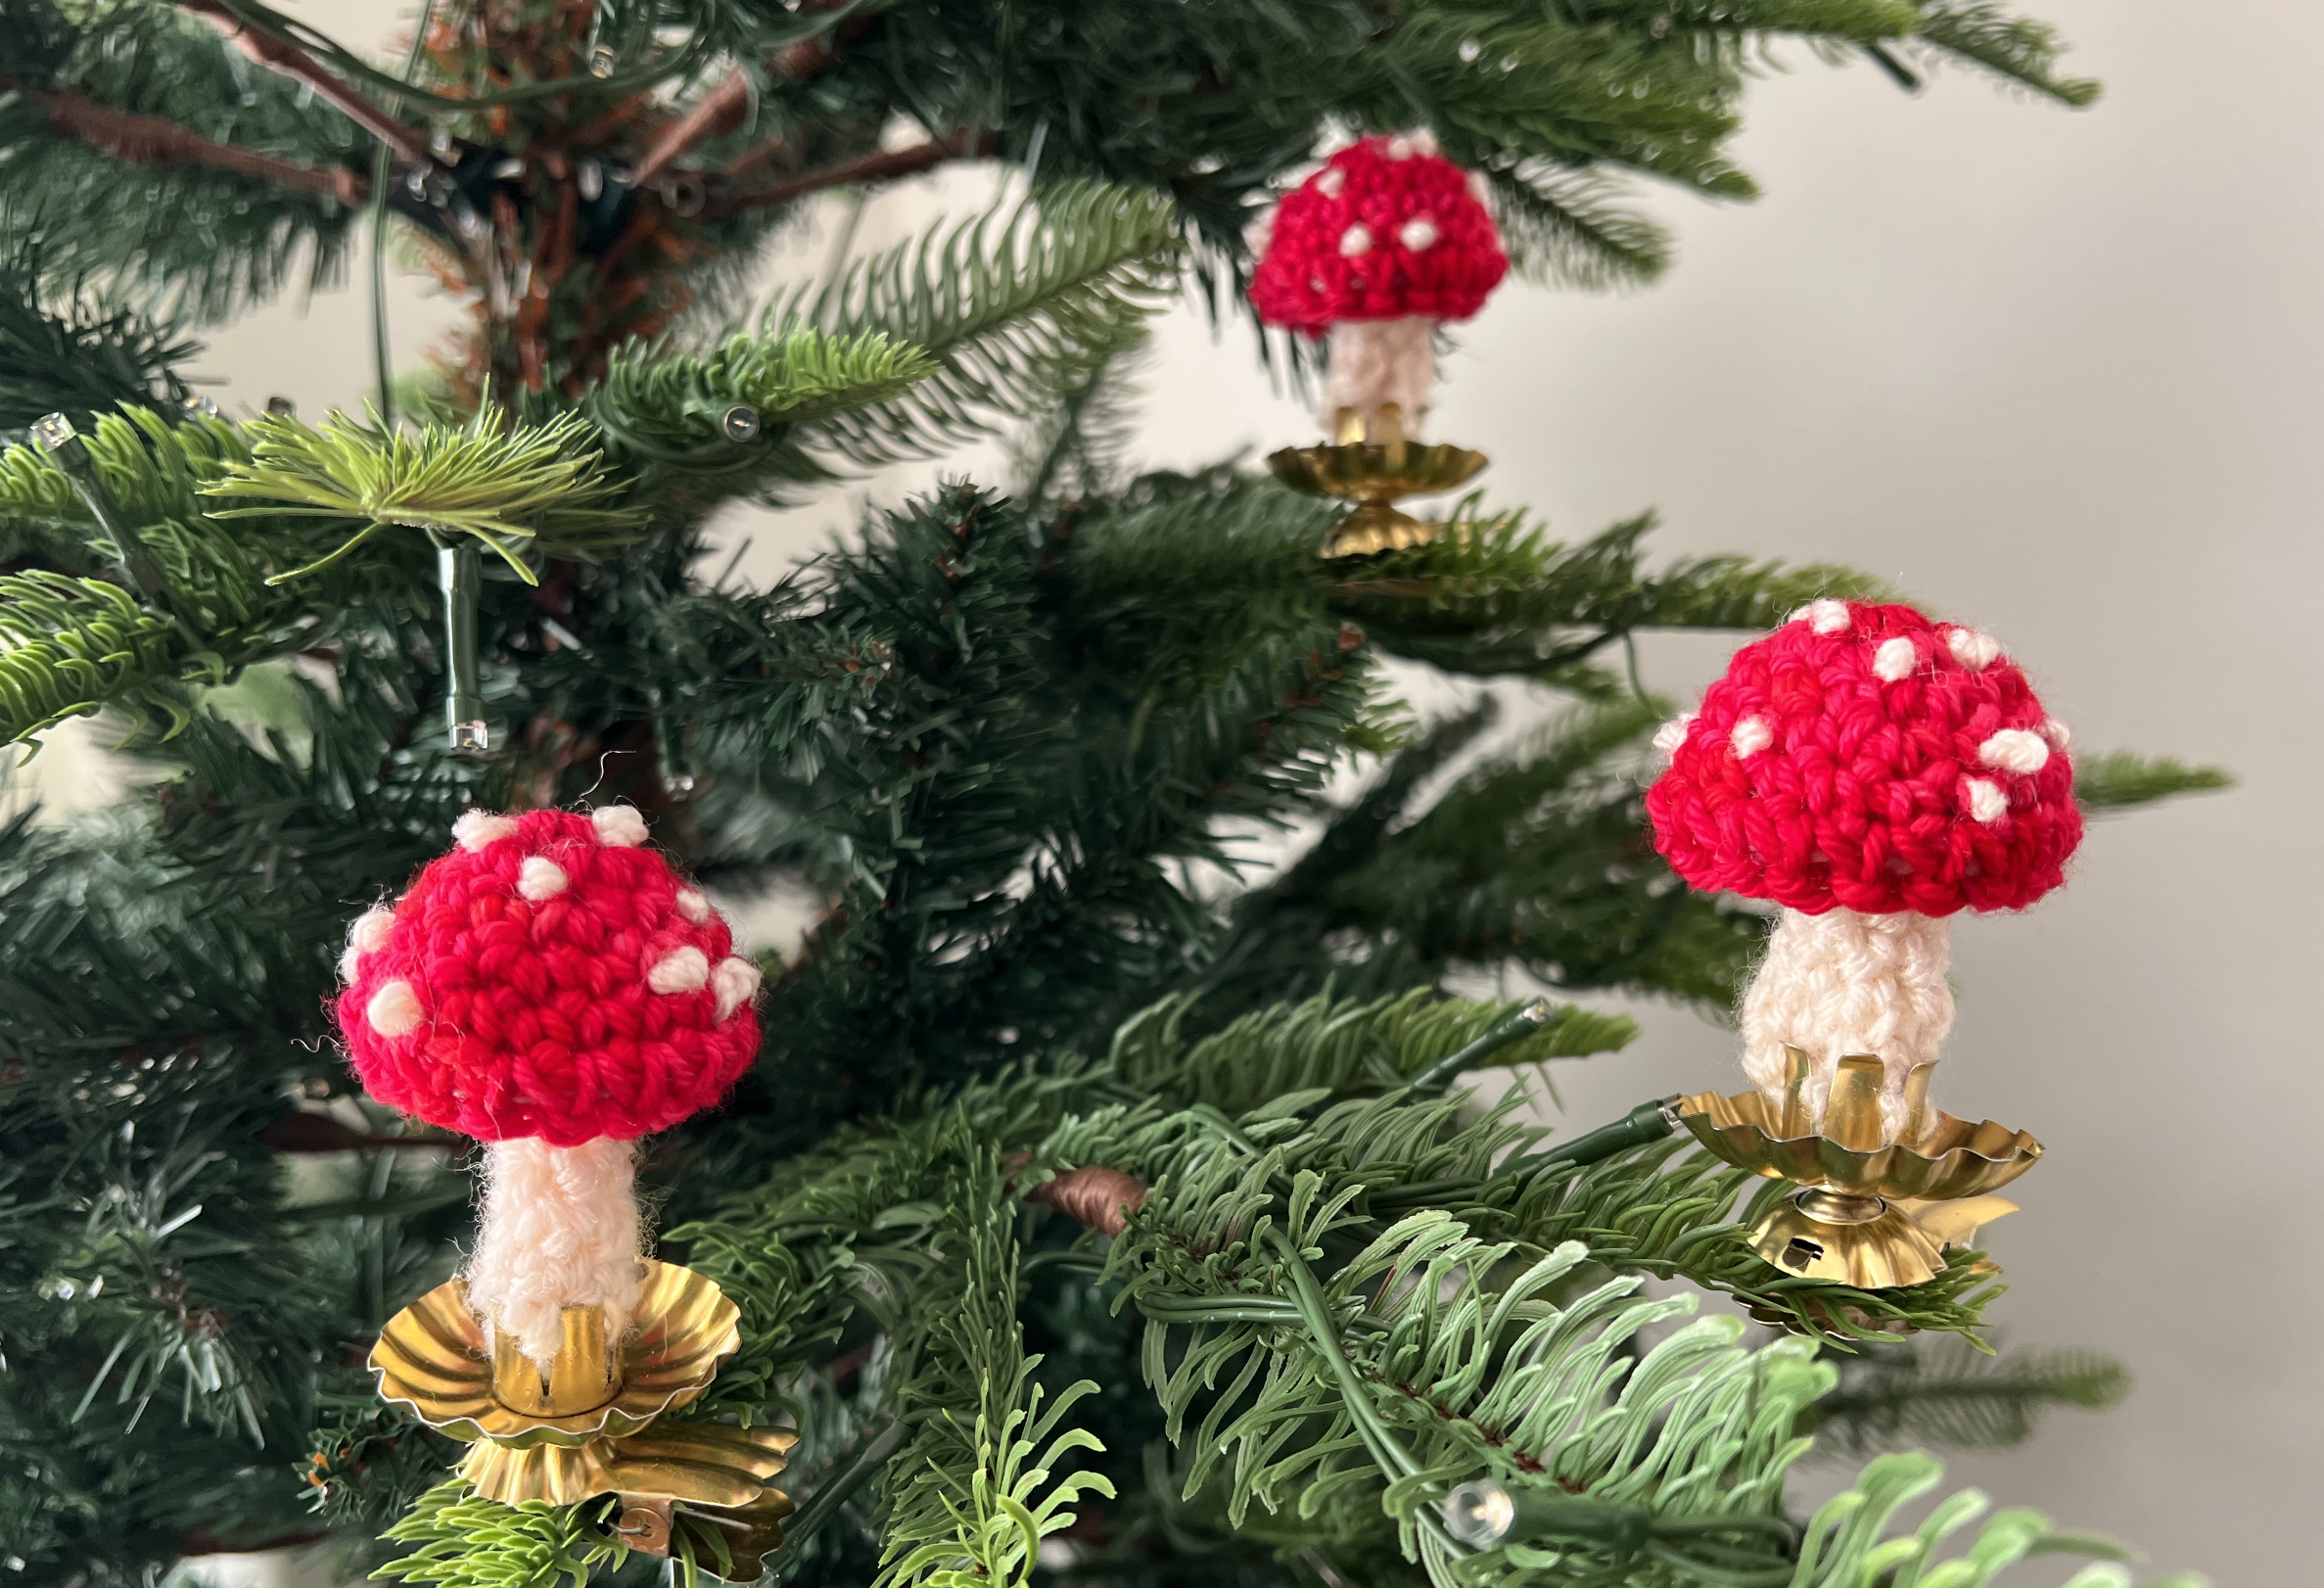 image of 3 small crocheted red and white toadstools clipped onto a christmas tree with candle clips